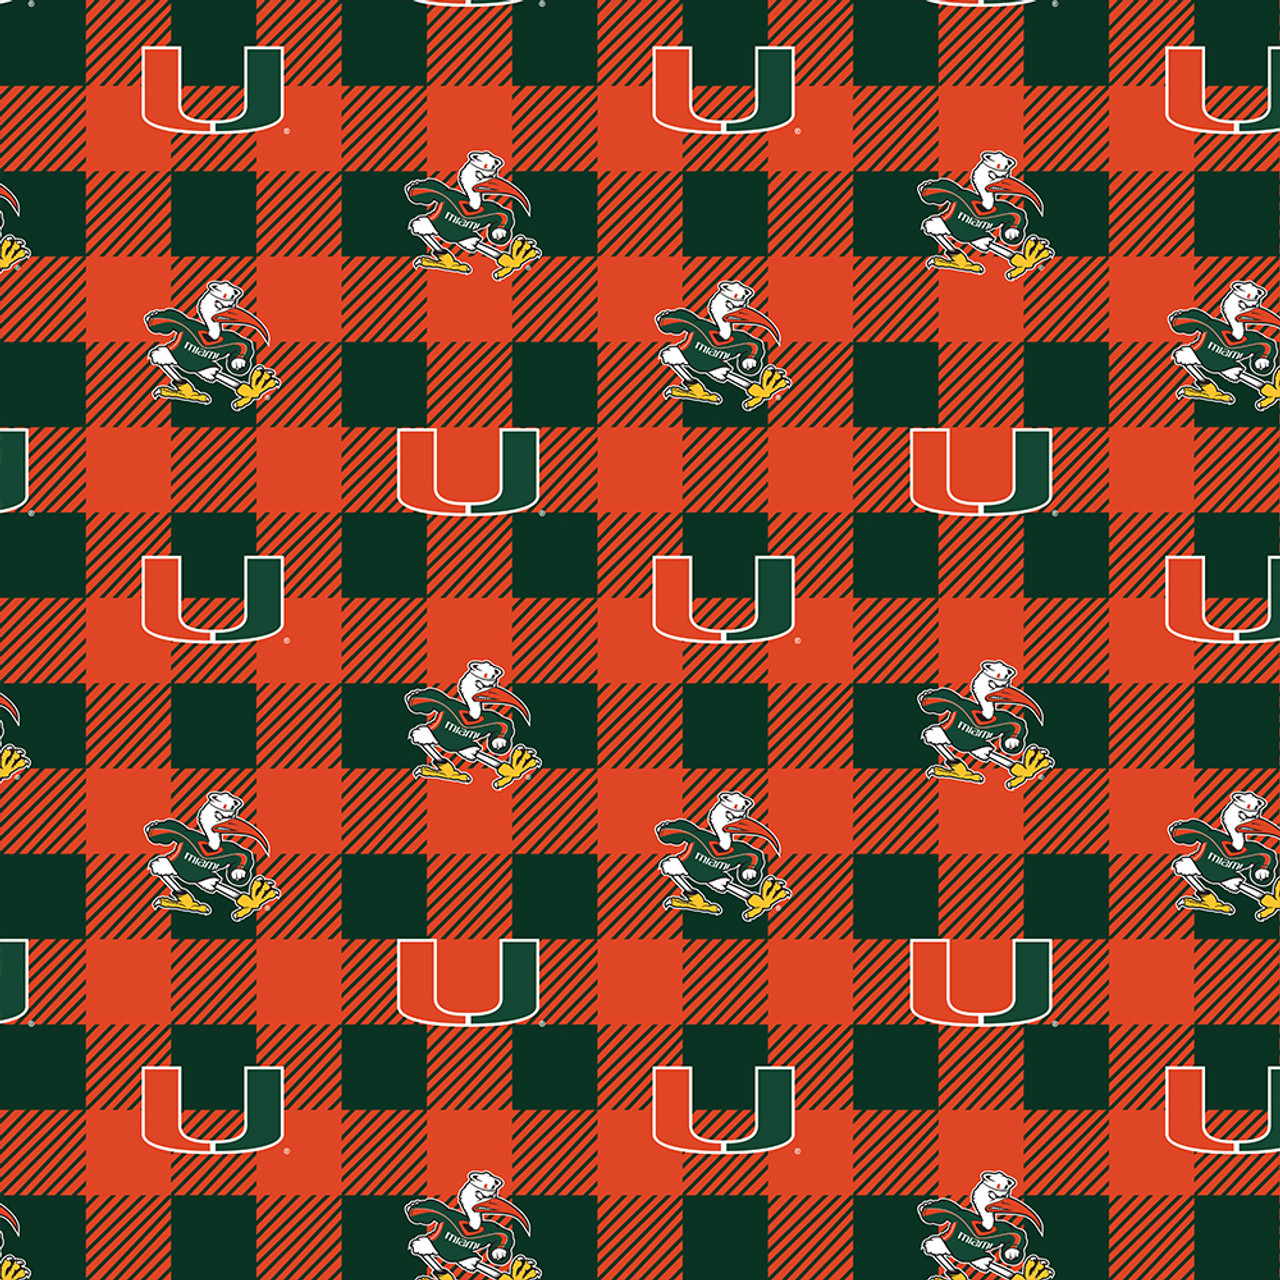 University of Miami Fleece Fabric with Buffalo Plaid design-Sold by the Yard